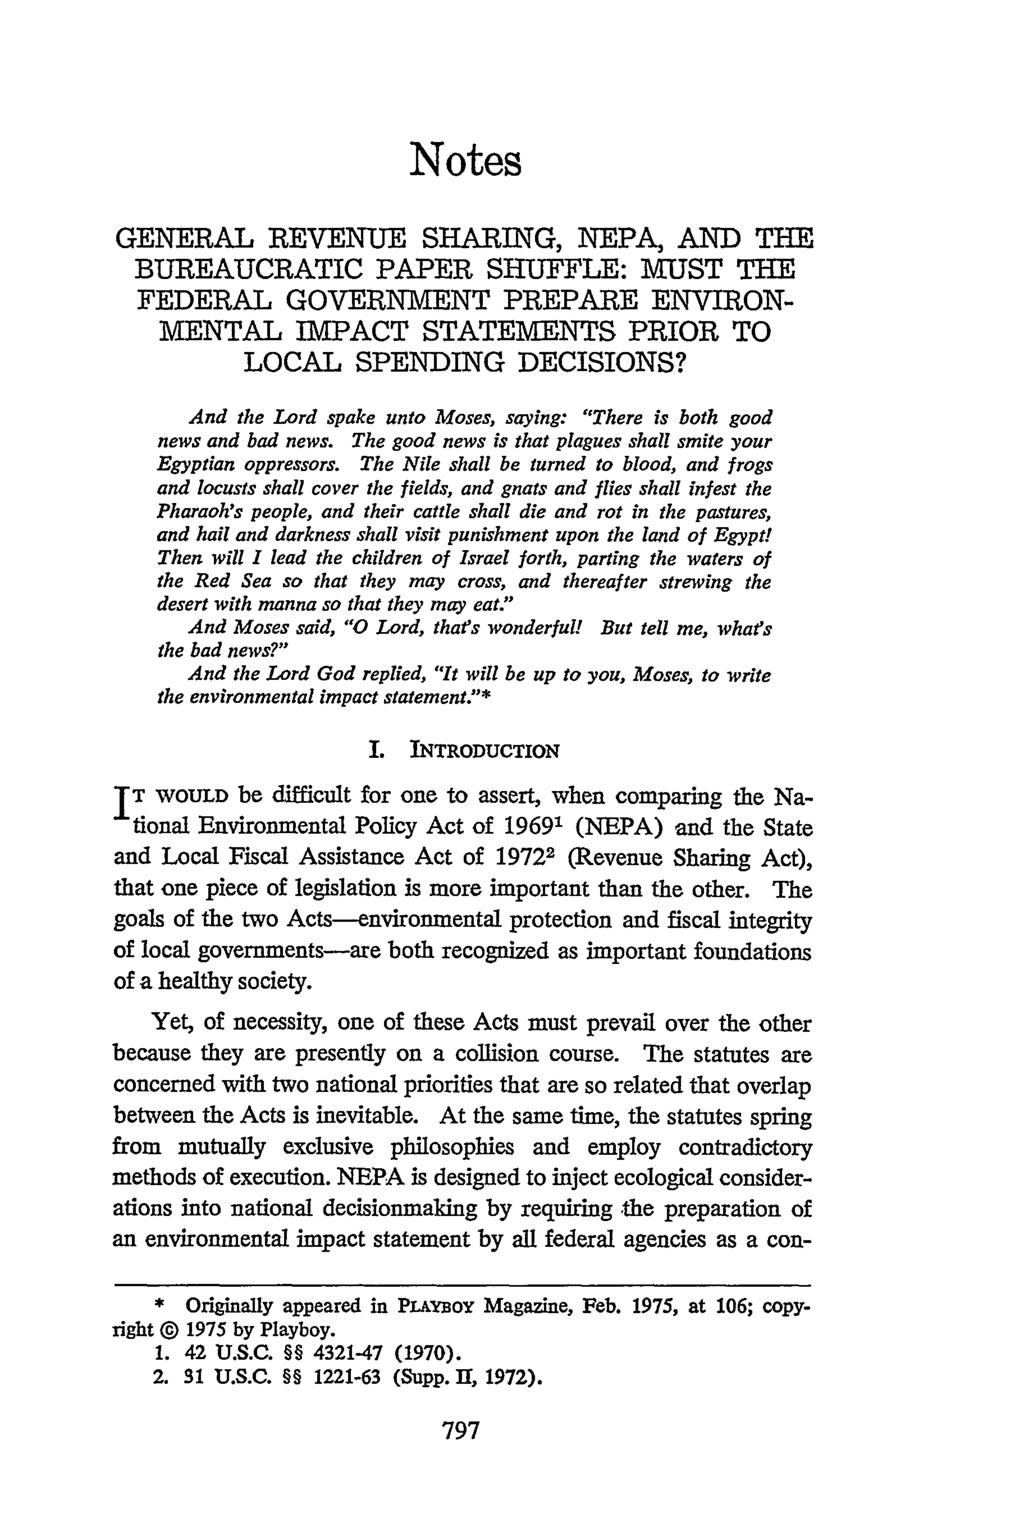 Notes GENERAL REVENUE SHARING, NEPA, AND THE BUREAUCRATIC PAPER SHUFFLE: VIUST THE FEDERAL GOVERNMENT PREPARE ENVIRON- MENTAL IMPACT STATEMENTS PRIOR TO LOCAL SPENDING DECISIONS?